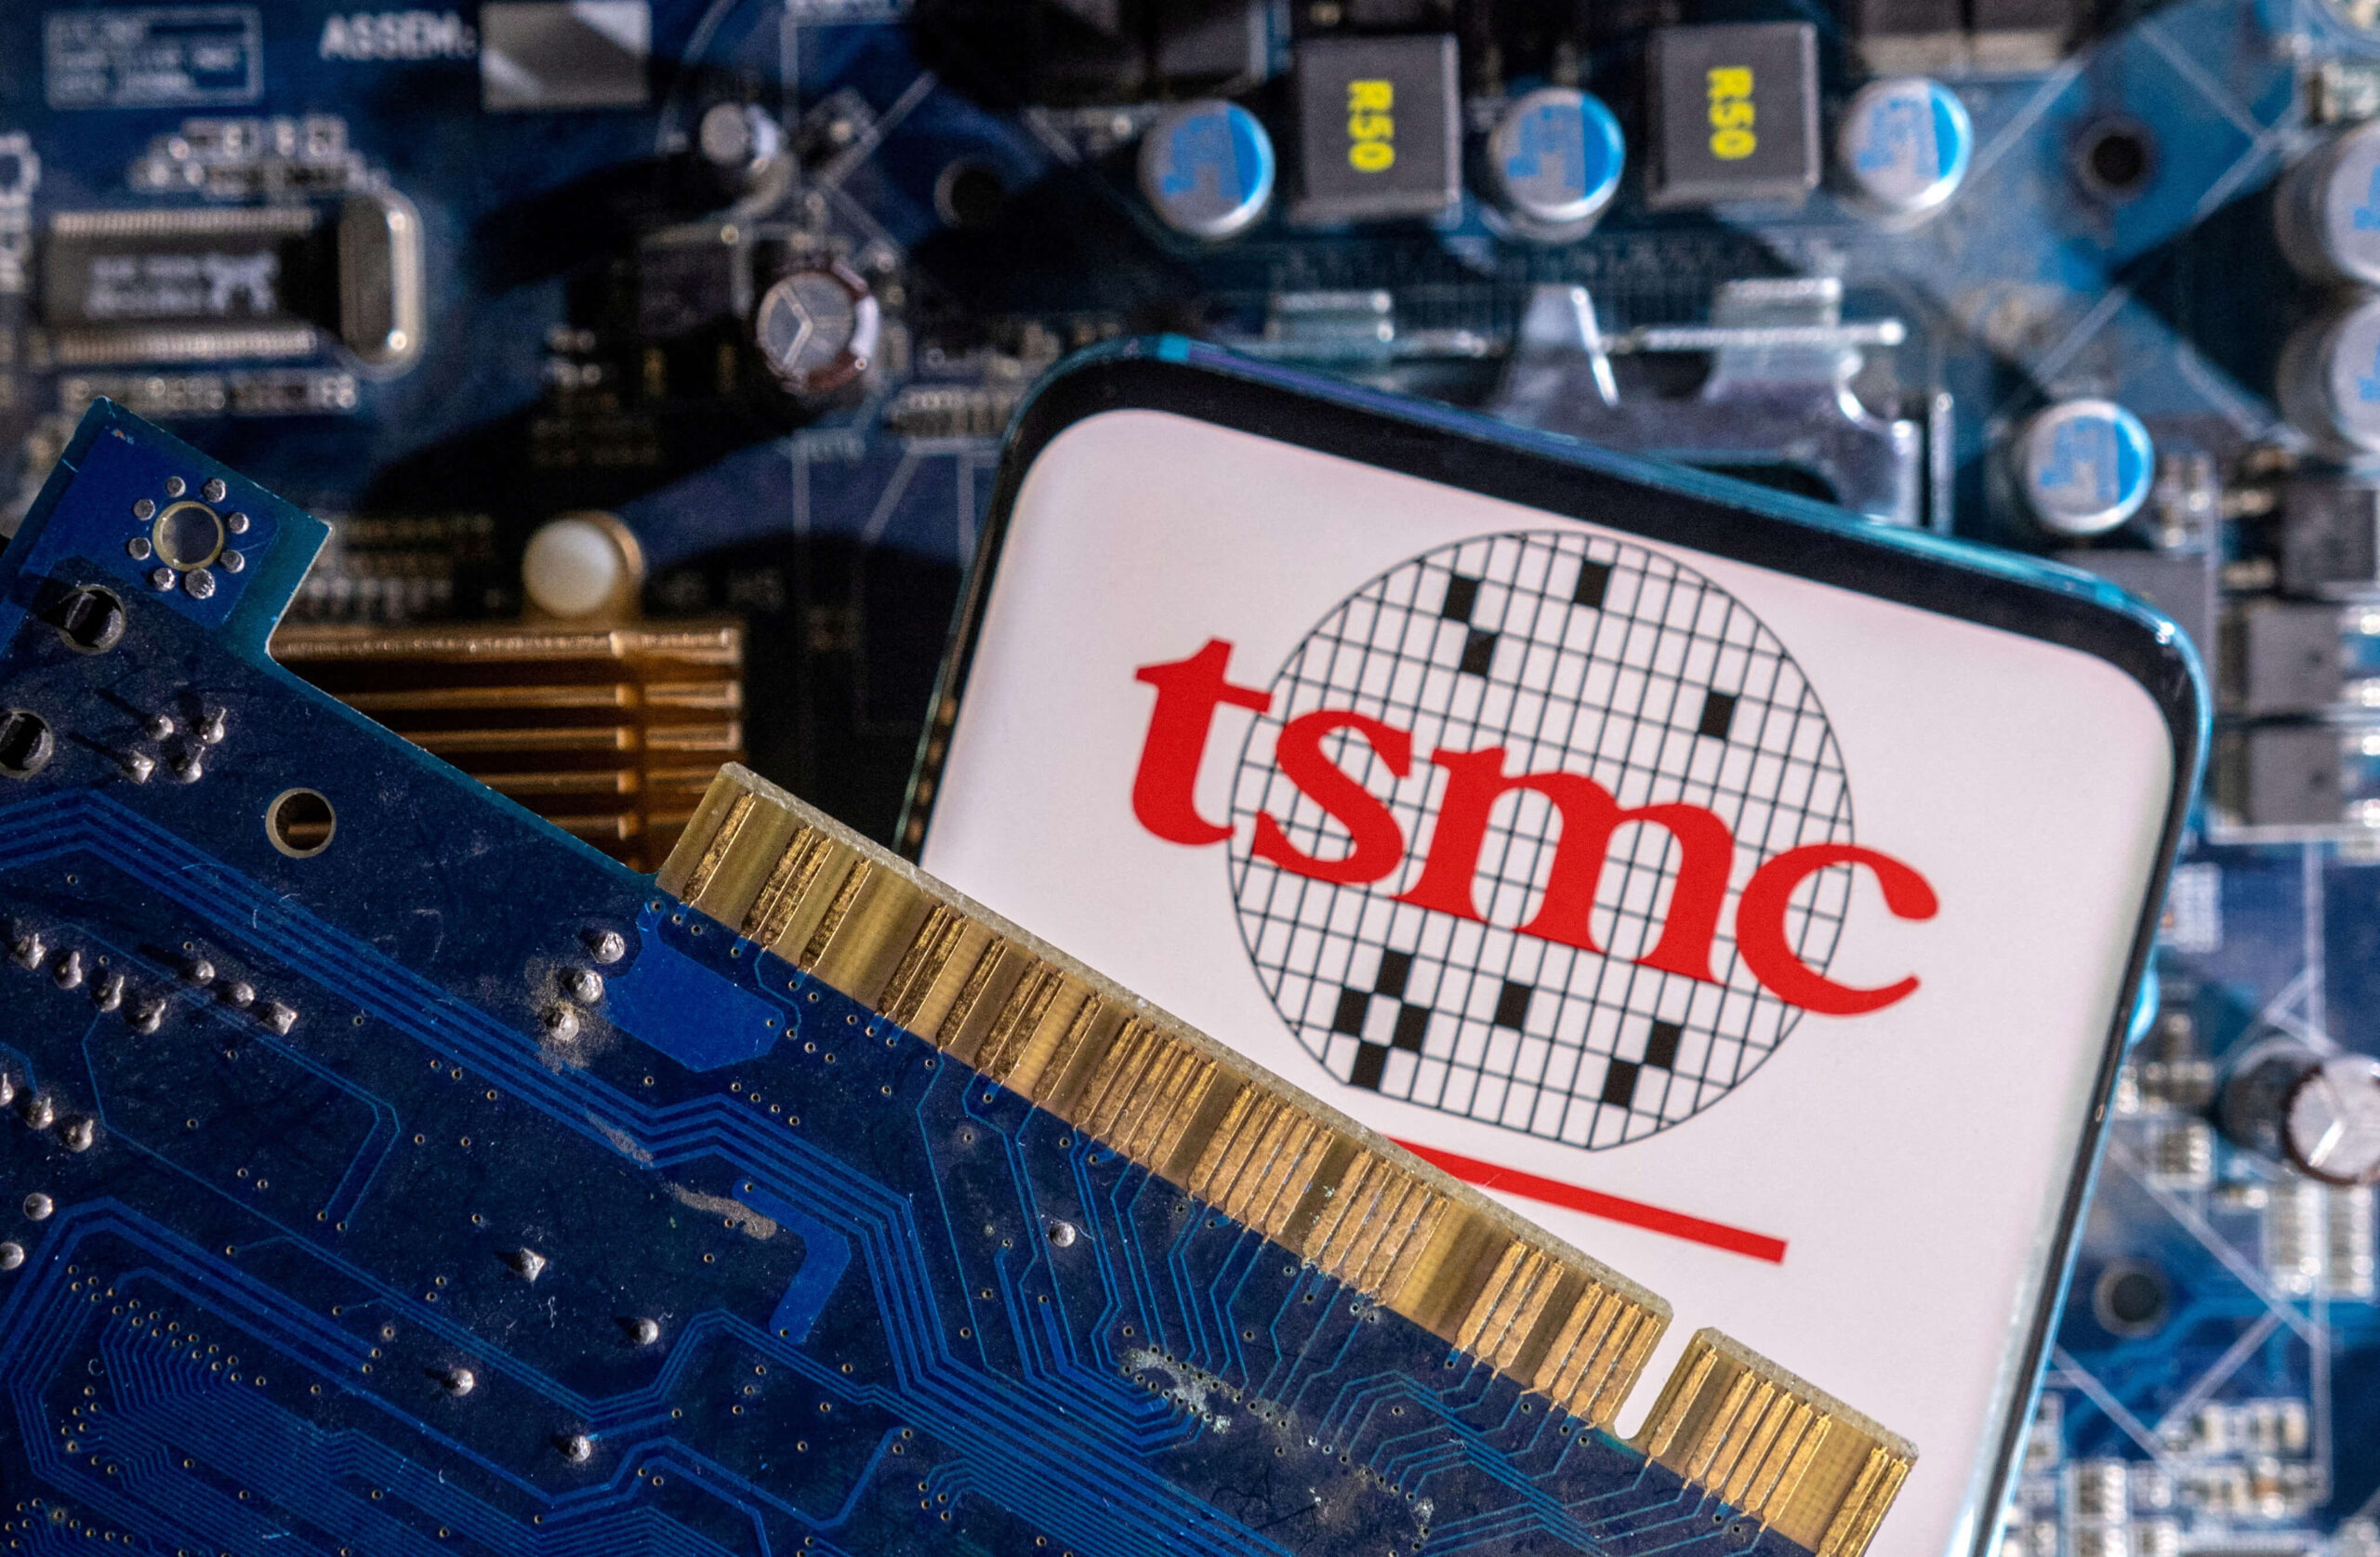 “TSMC Instructs Suppliers to Postpone Chip Equipment Deliveries, Insider Sources Reveal”